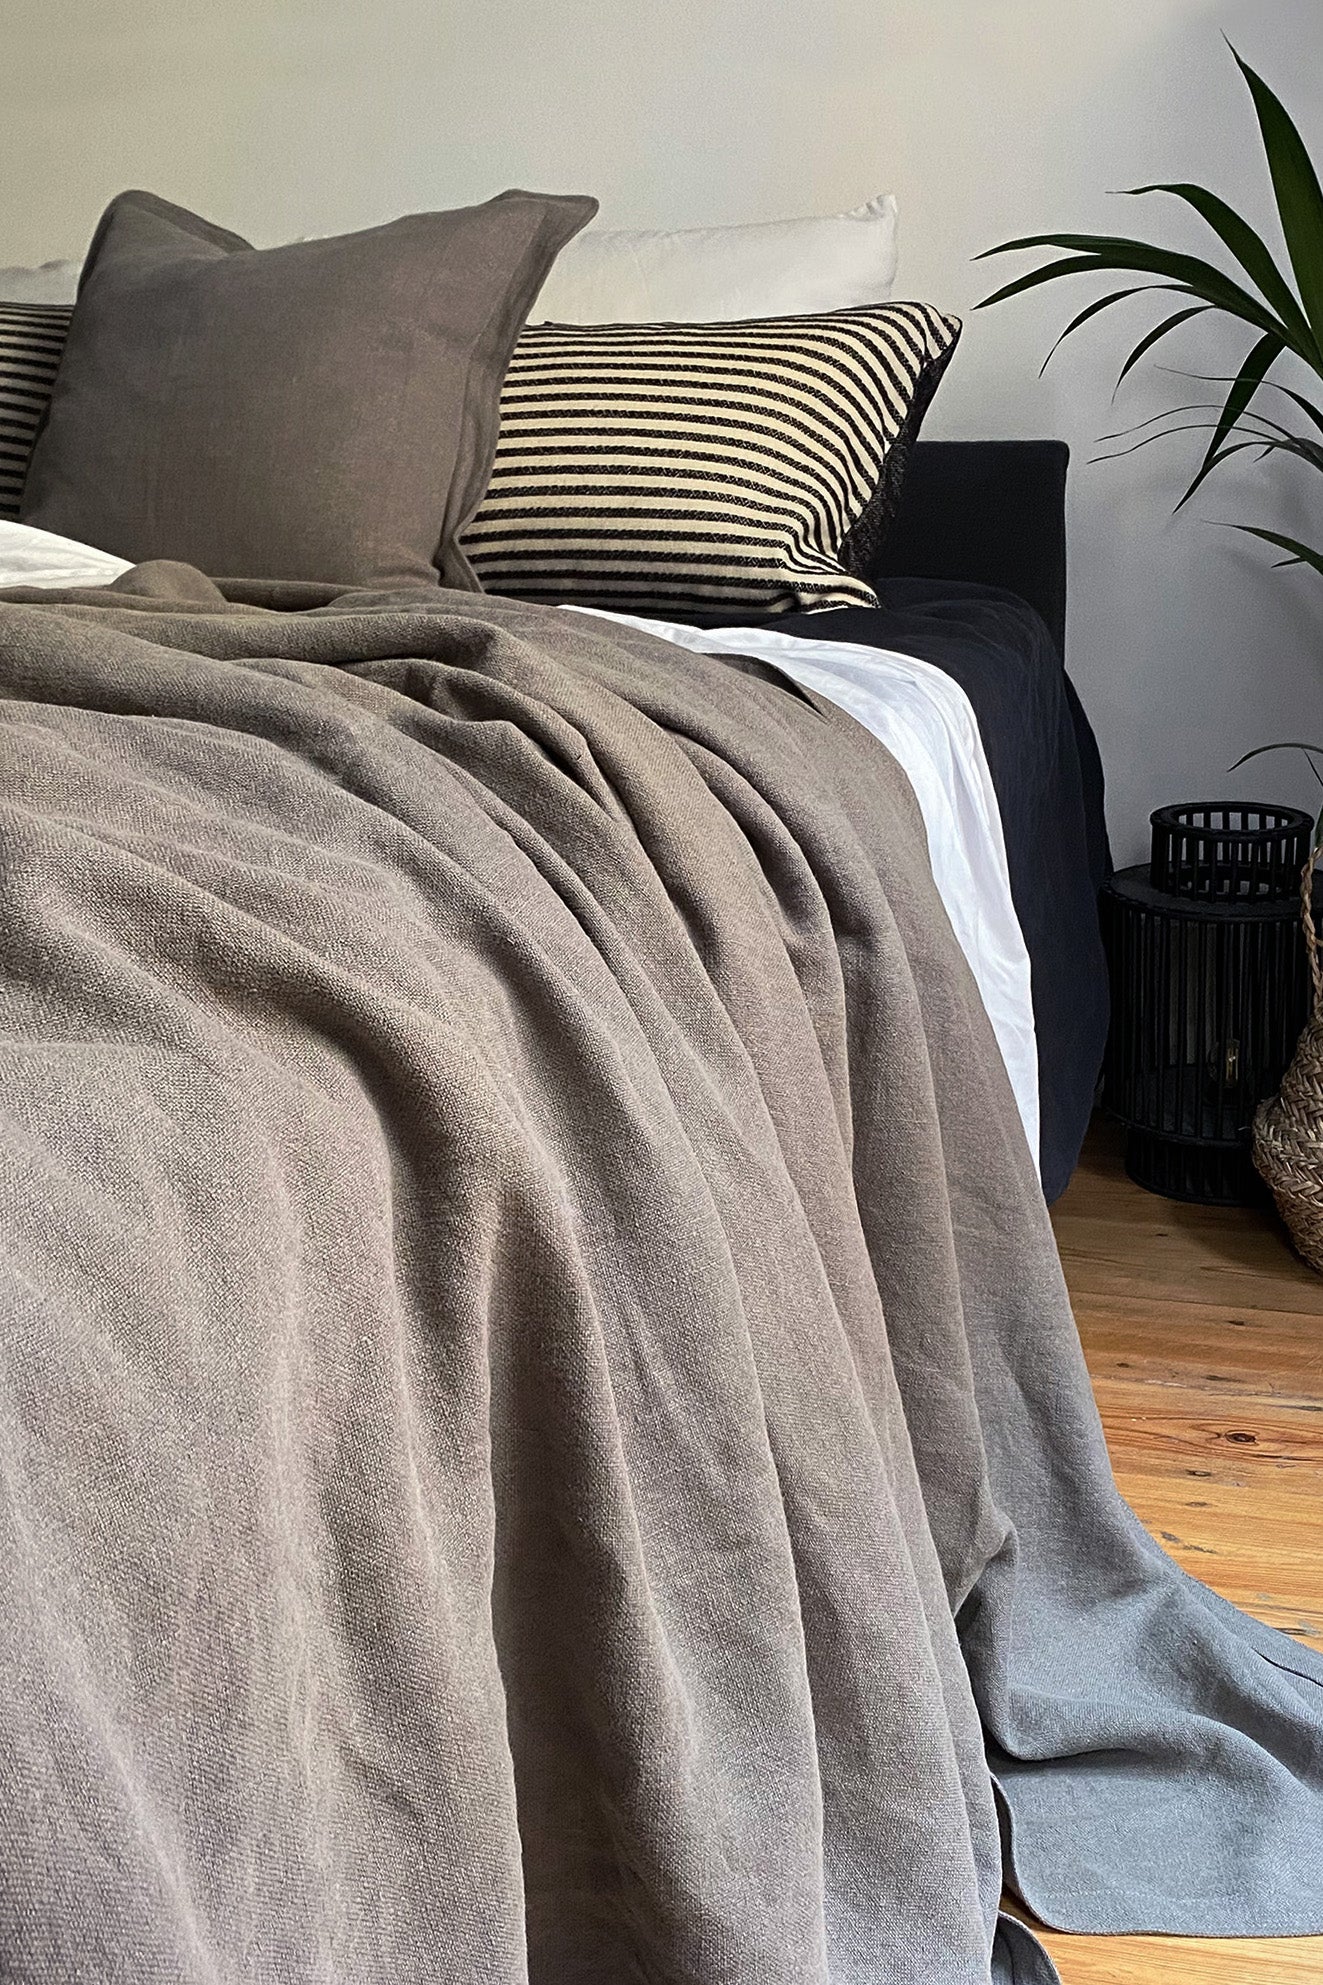 Utility Bed Throw Stonewashed Linen Blanket in Smoke Grey - Biggs & Hill - Blanket - Bedspread - blanket - charcoal